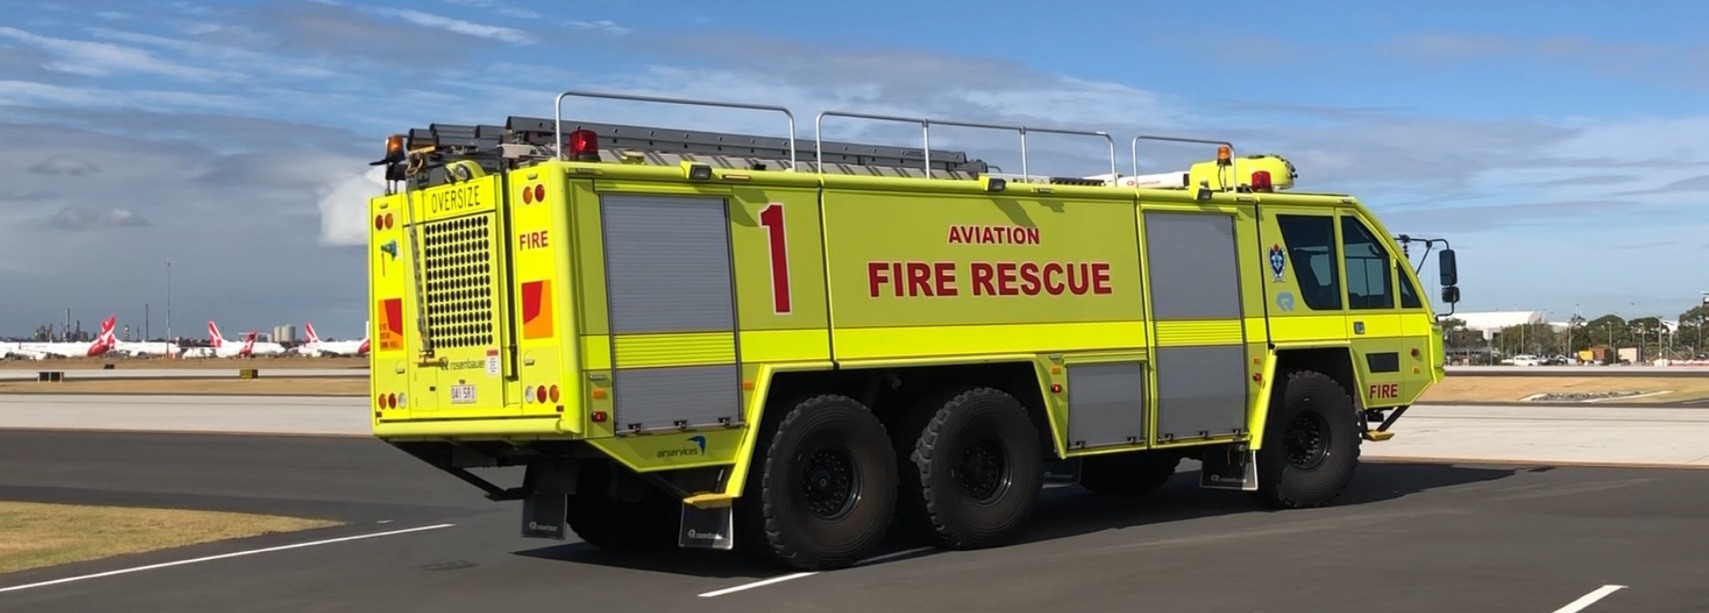 airservices-fire-fighters-in-new-brisbane-runway-training-exercise-airservices